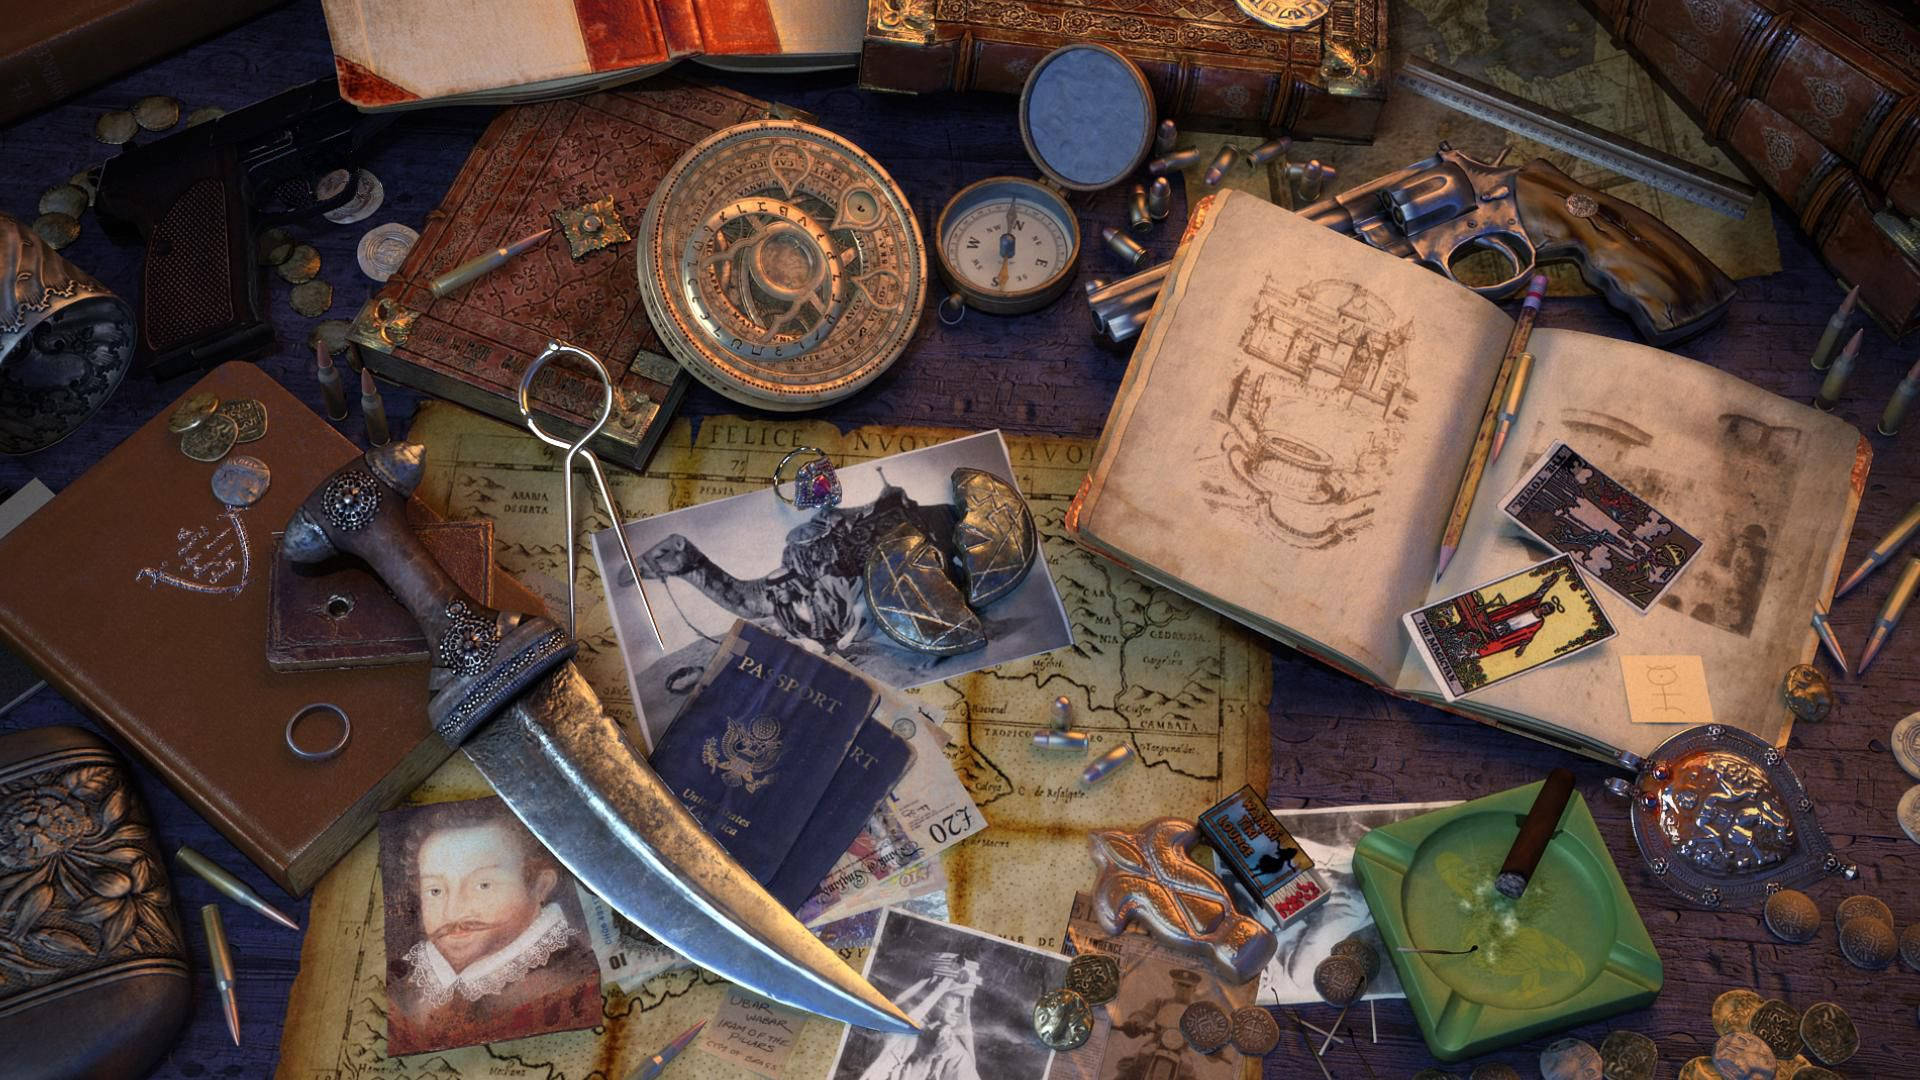 Uncharted Game Books And Artefacts